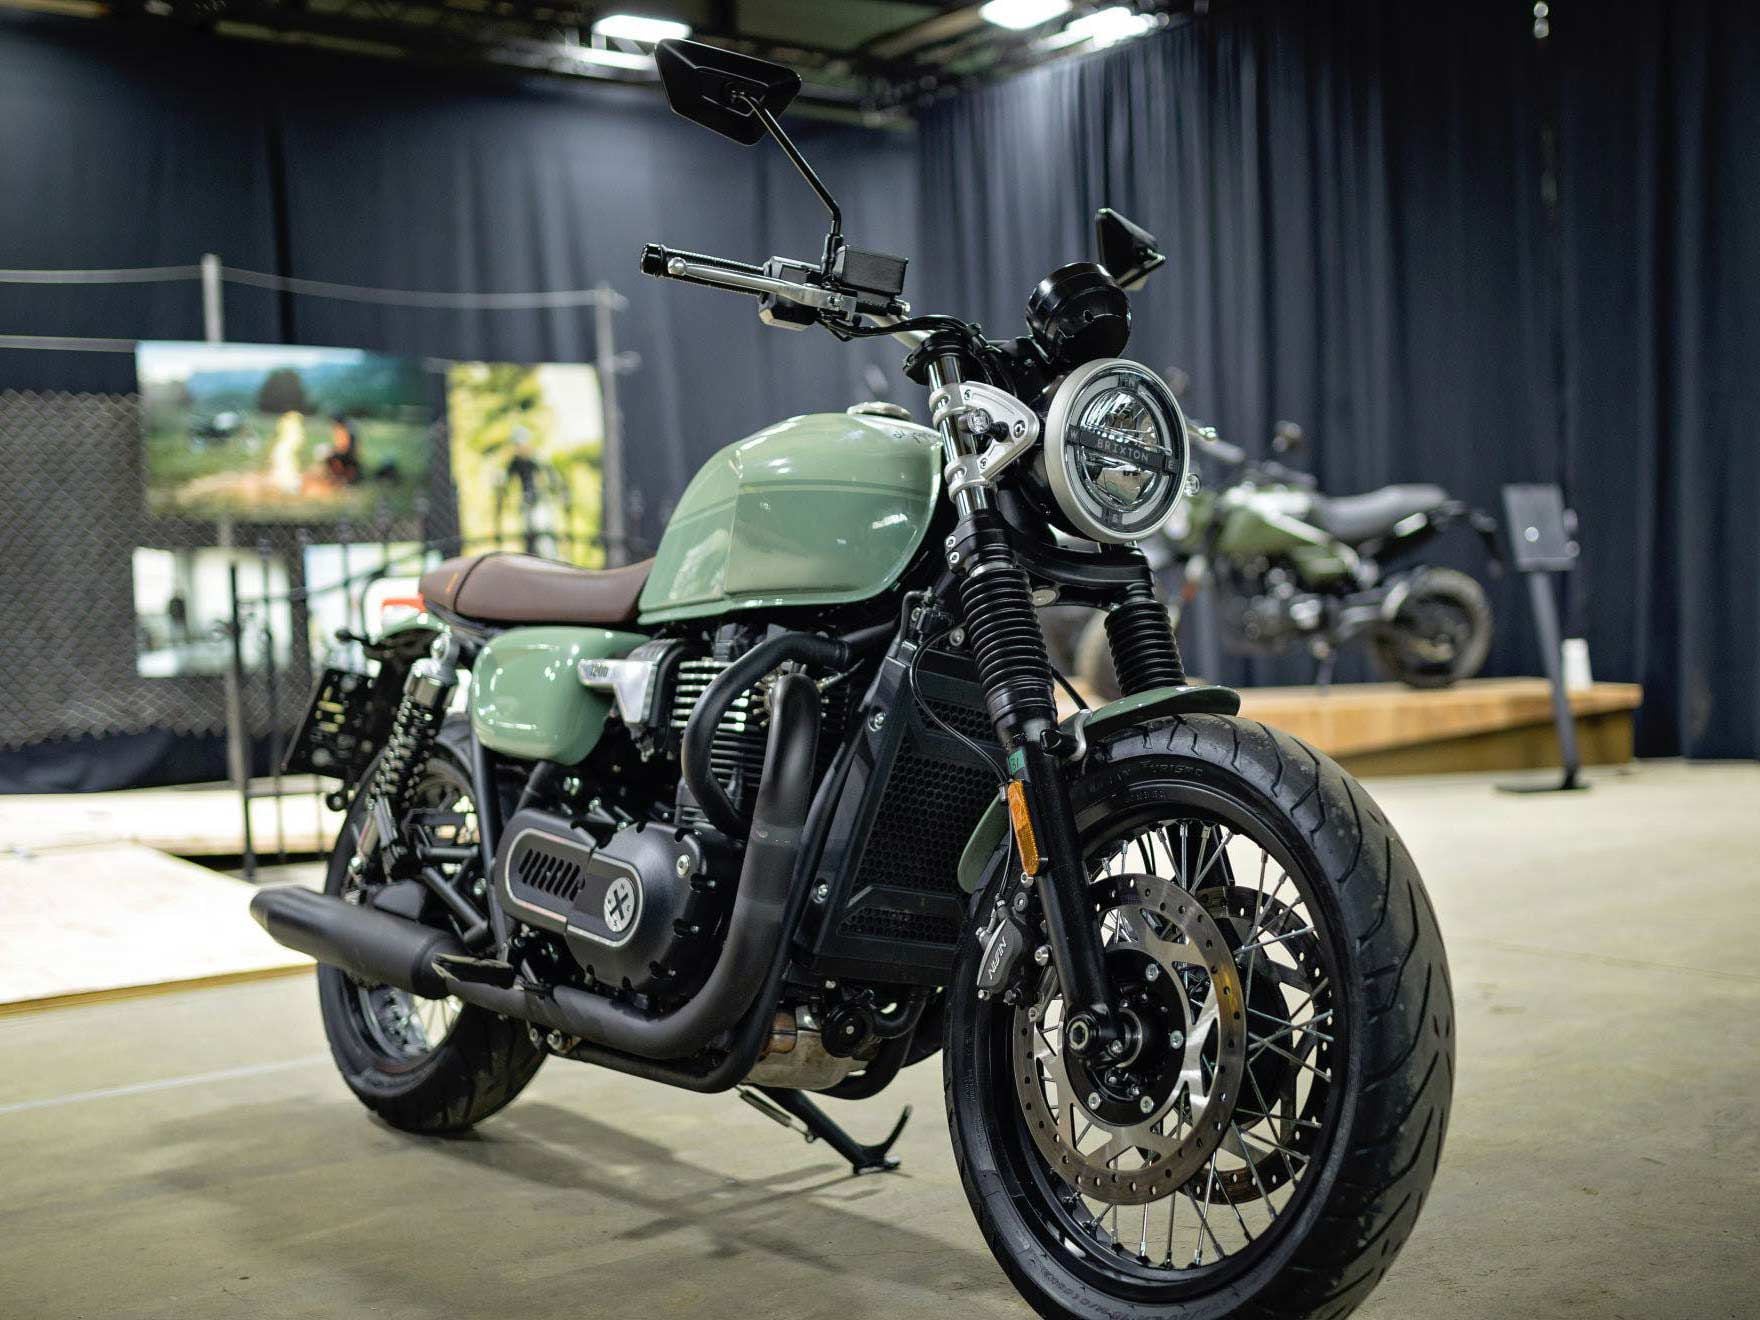 The Brixton Cromwell 1200 is clearly going after Triumph’s Bonneville range.